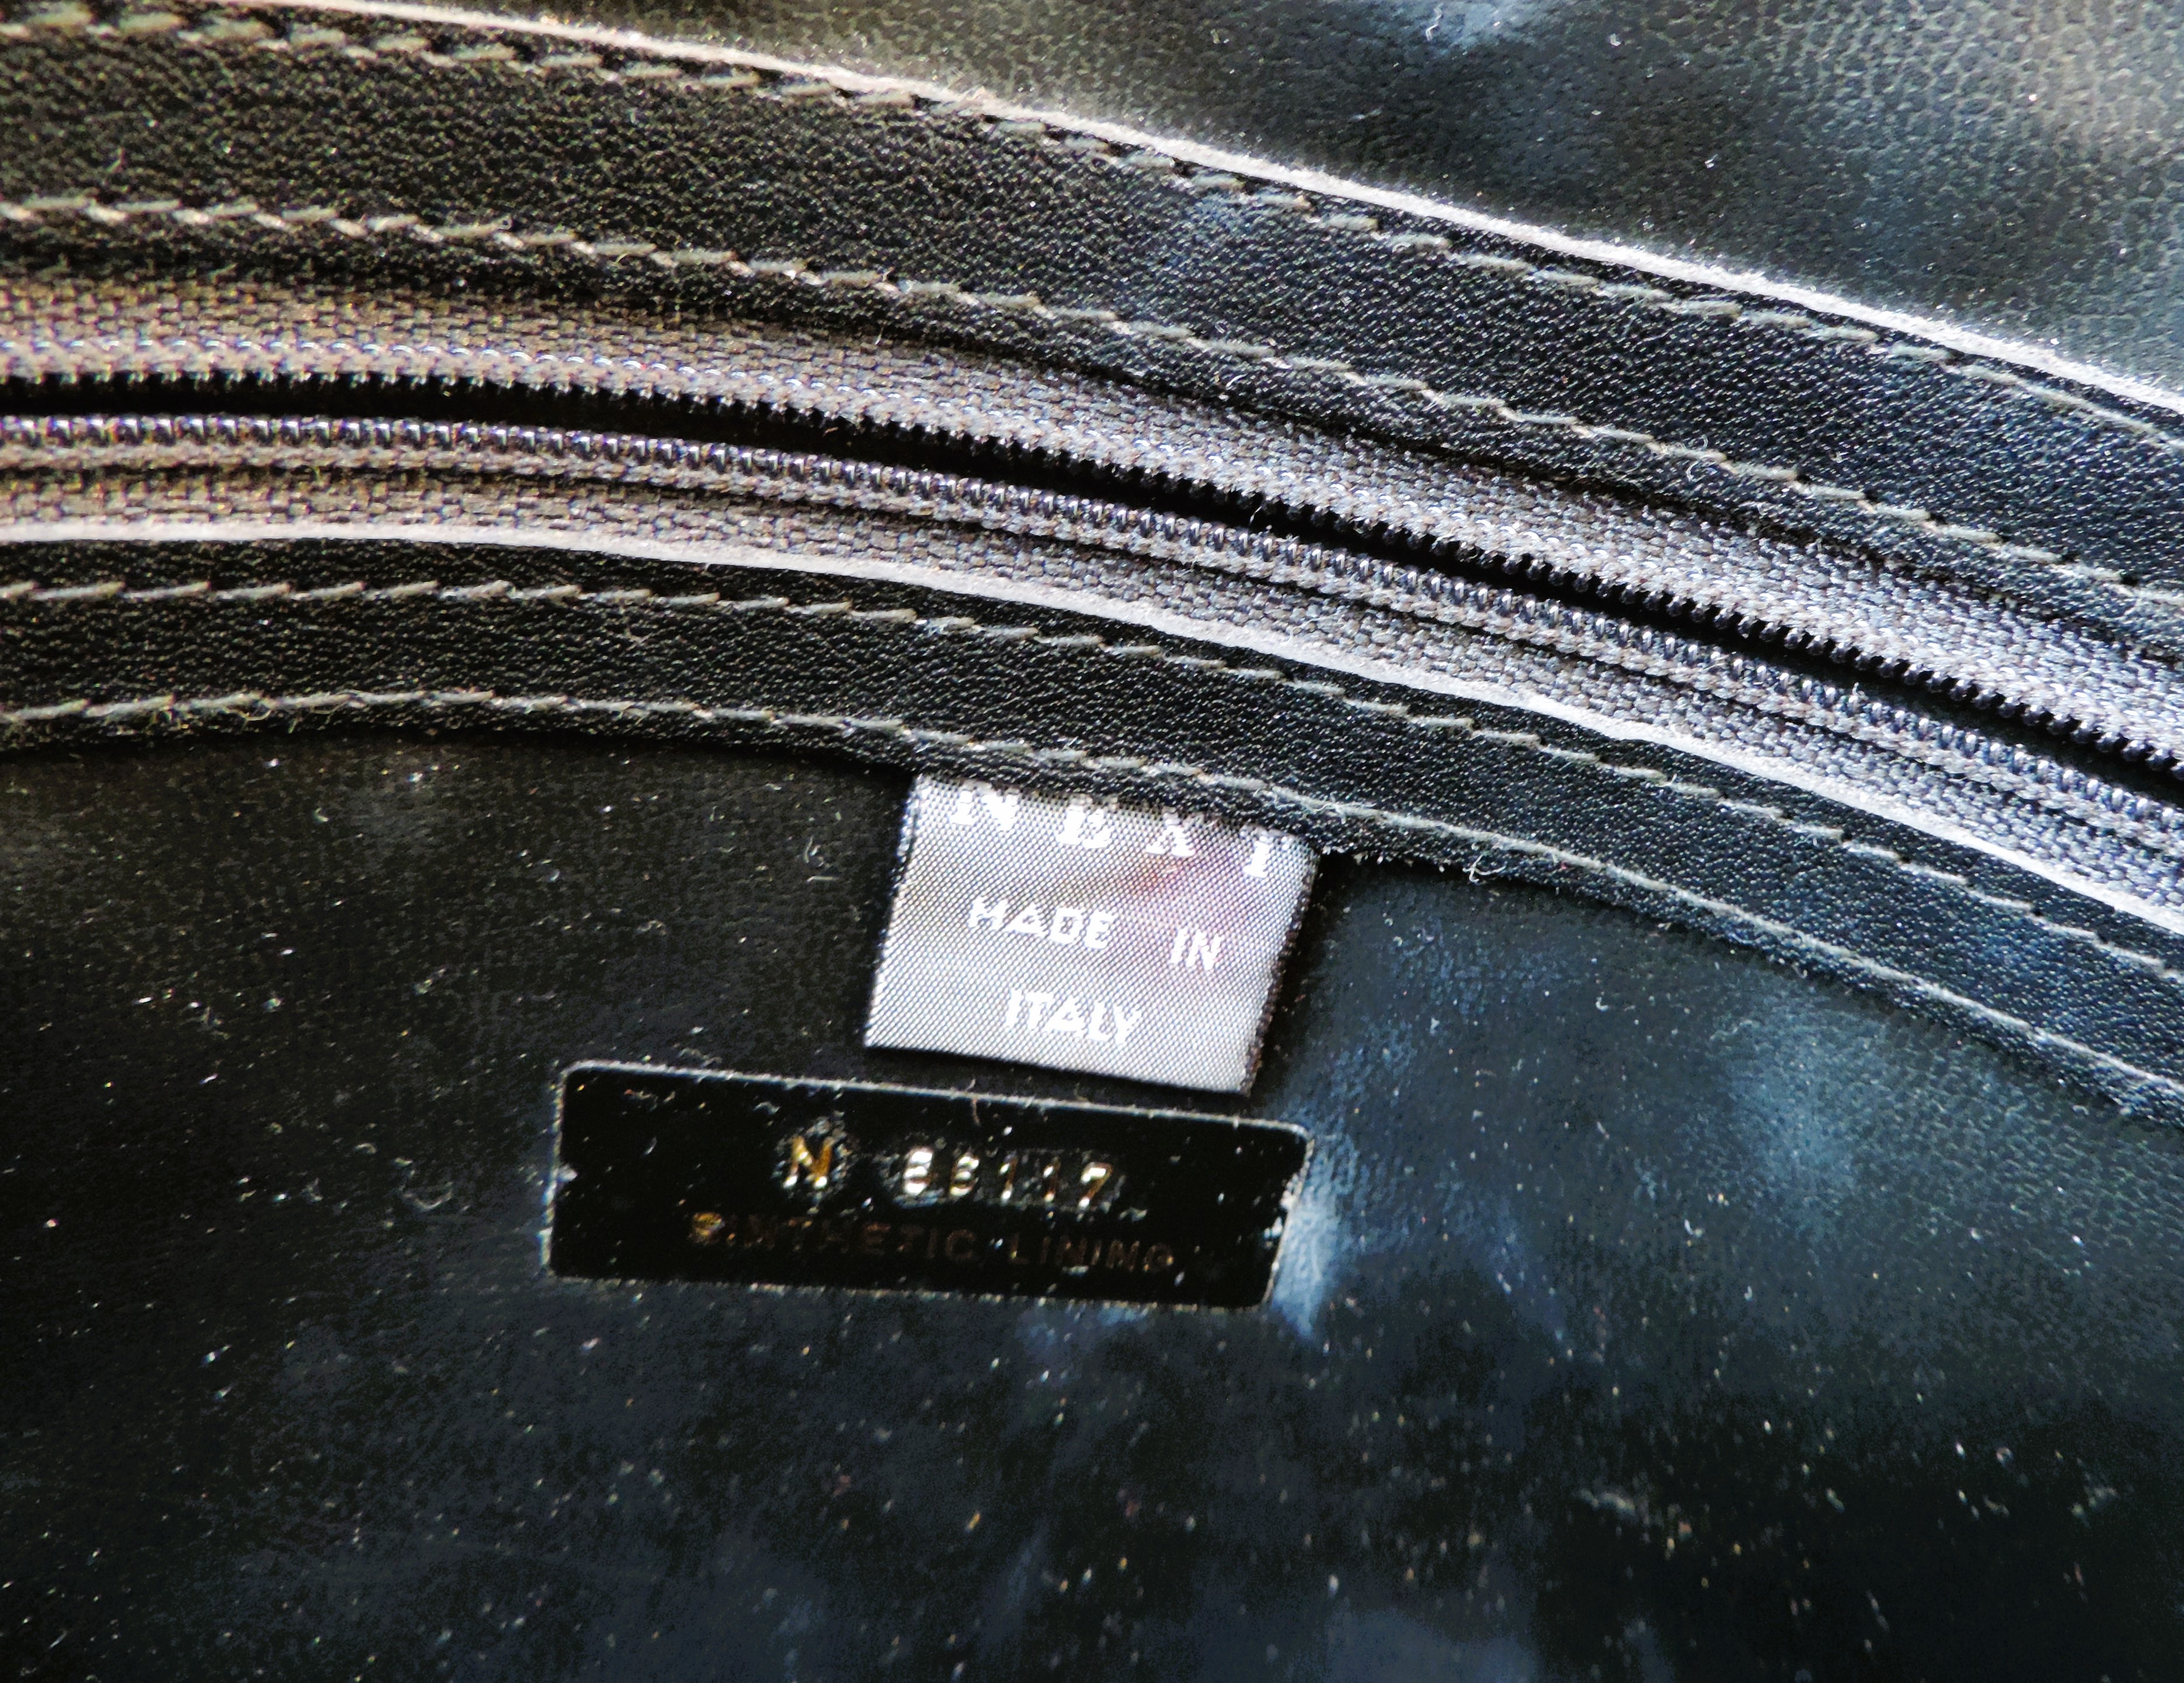 Made in Italy Black Leather Bag - Image 7 of 8